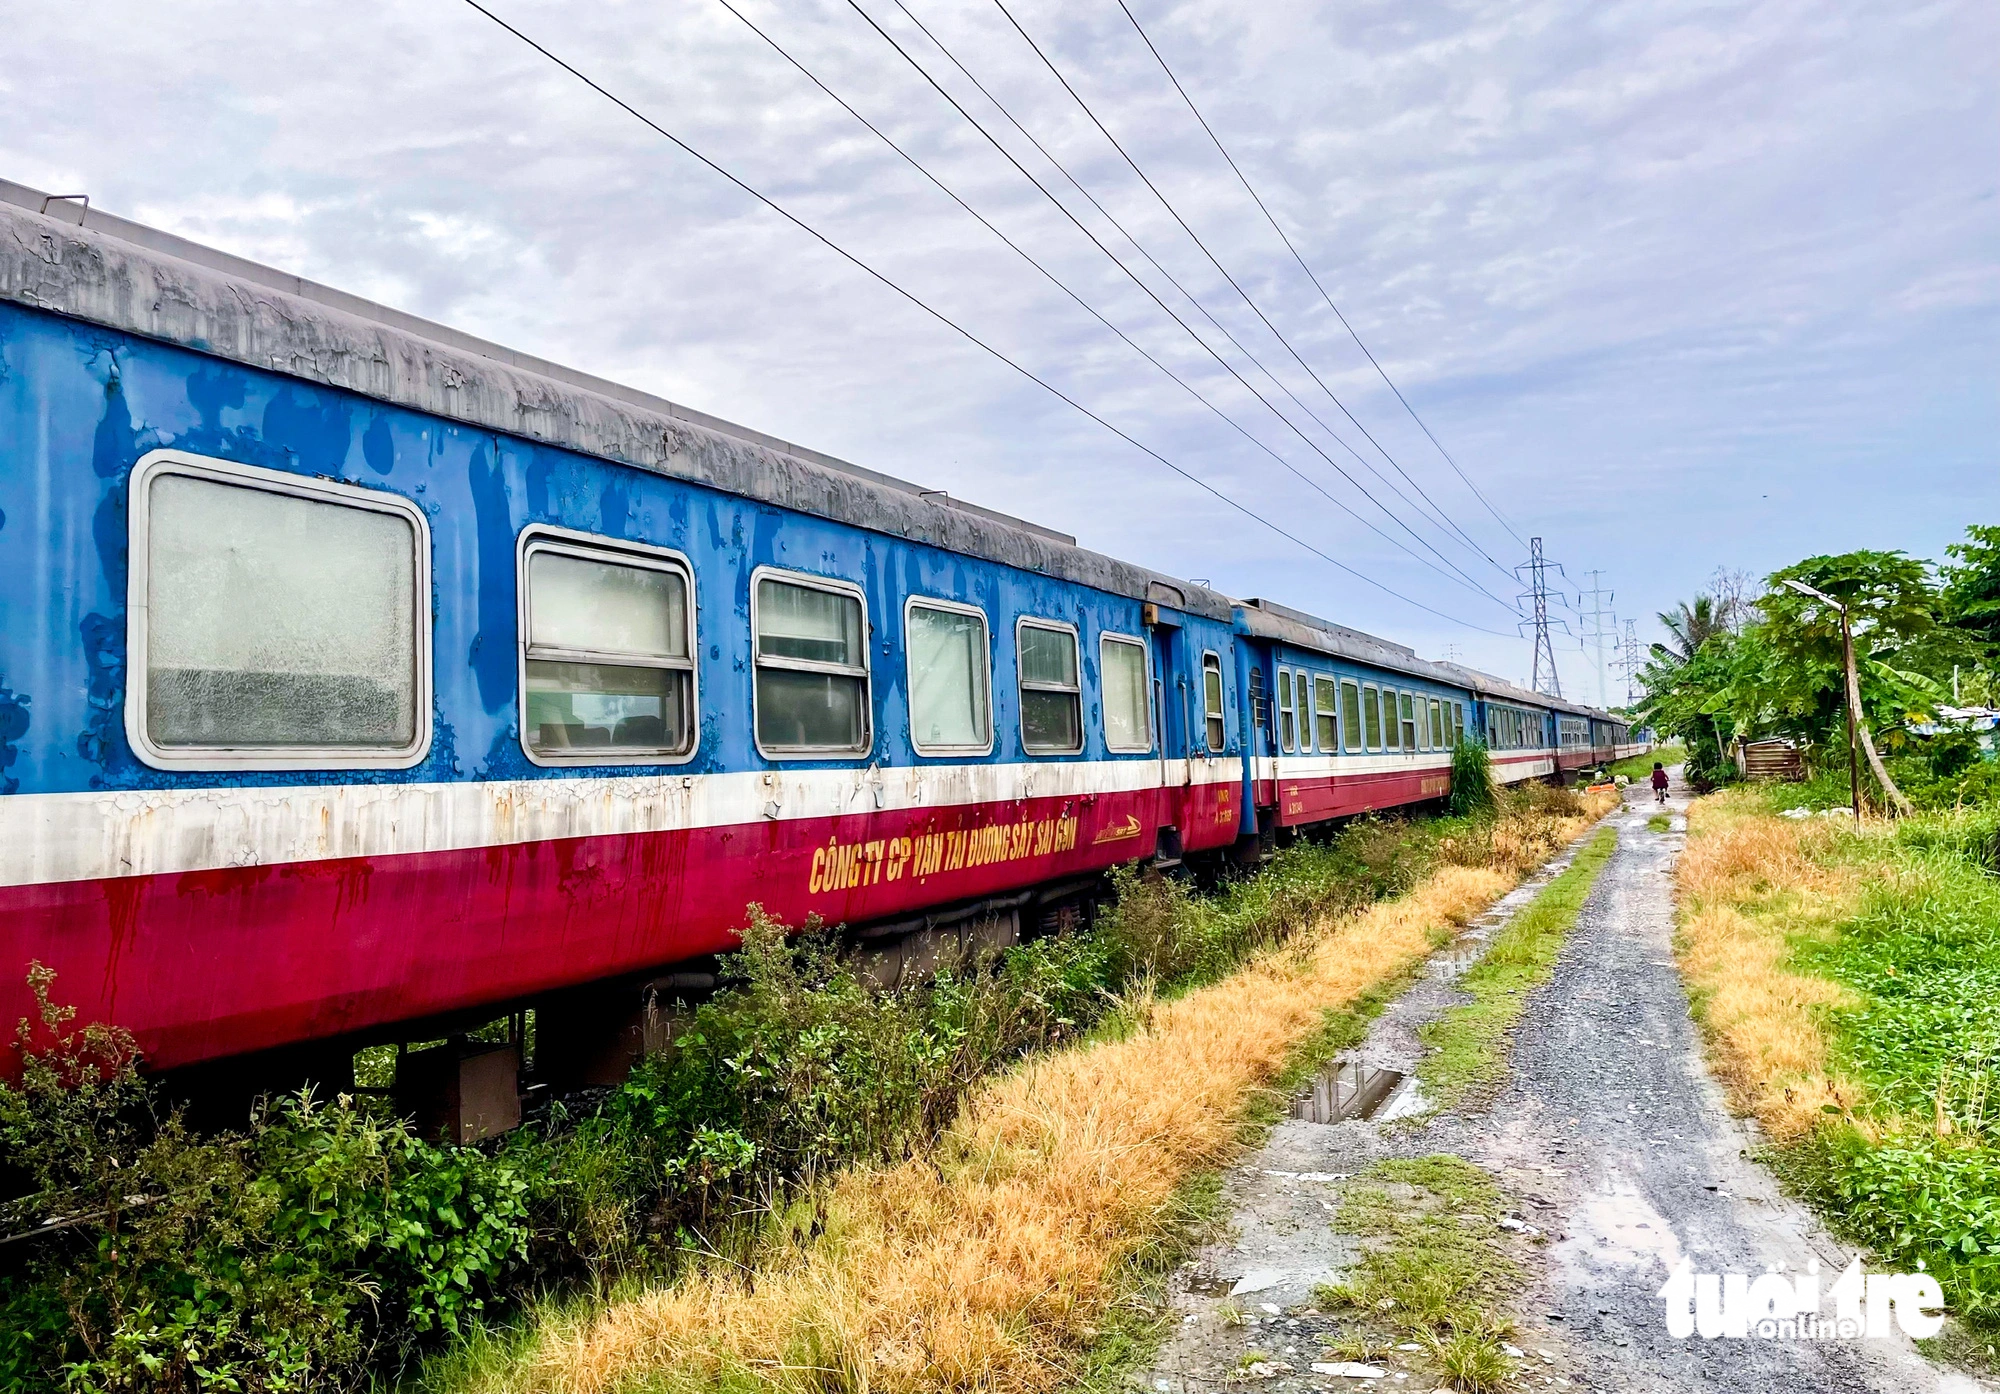 The North-South railway currently ends in Ho Chi Minh City with 11 pairs of passenger trains per day. The figure increases to 15 pairs of trains per day on holidays.